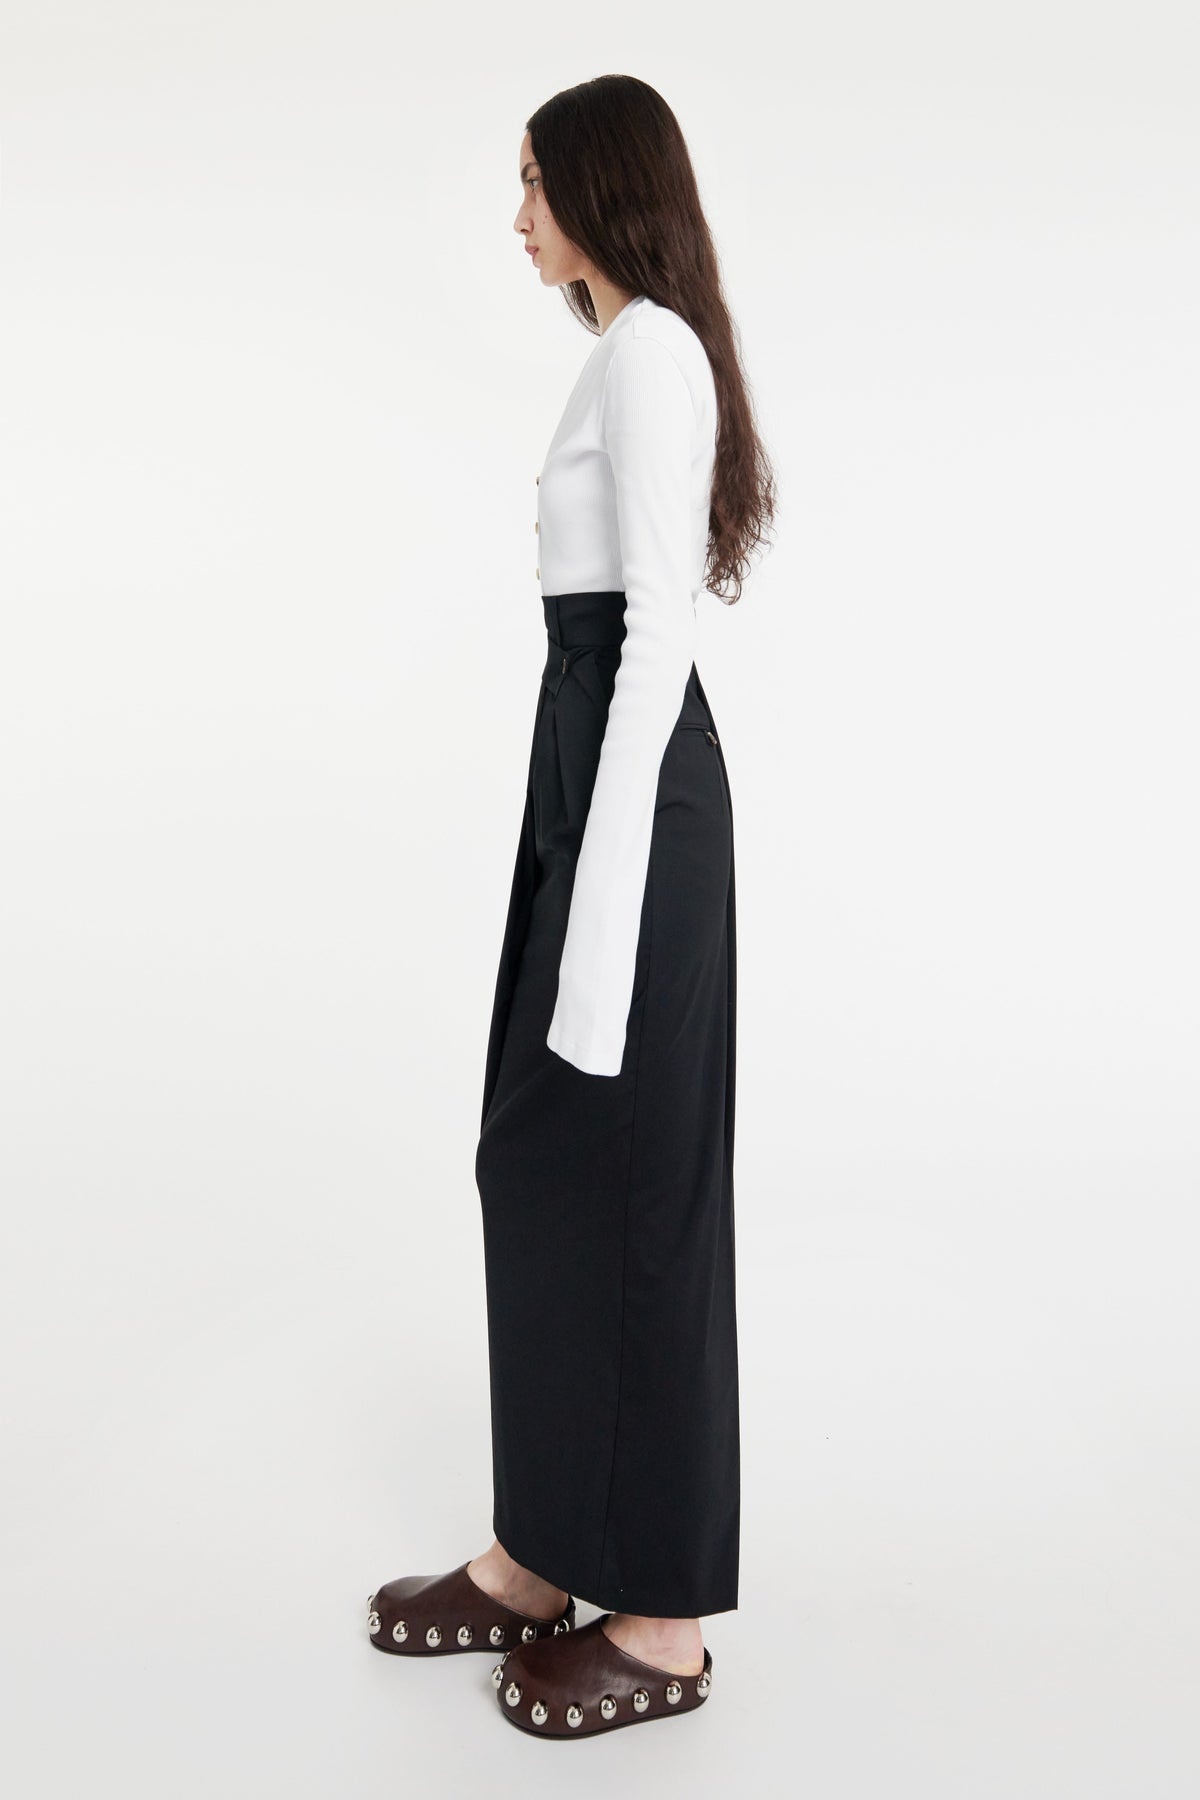 DECONSTRUCTED TROUSERS SKIRT BLACK - 9